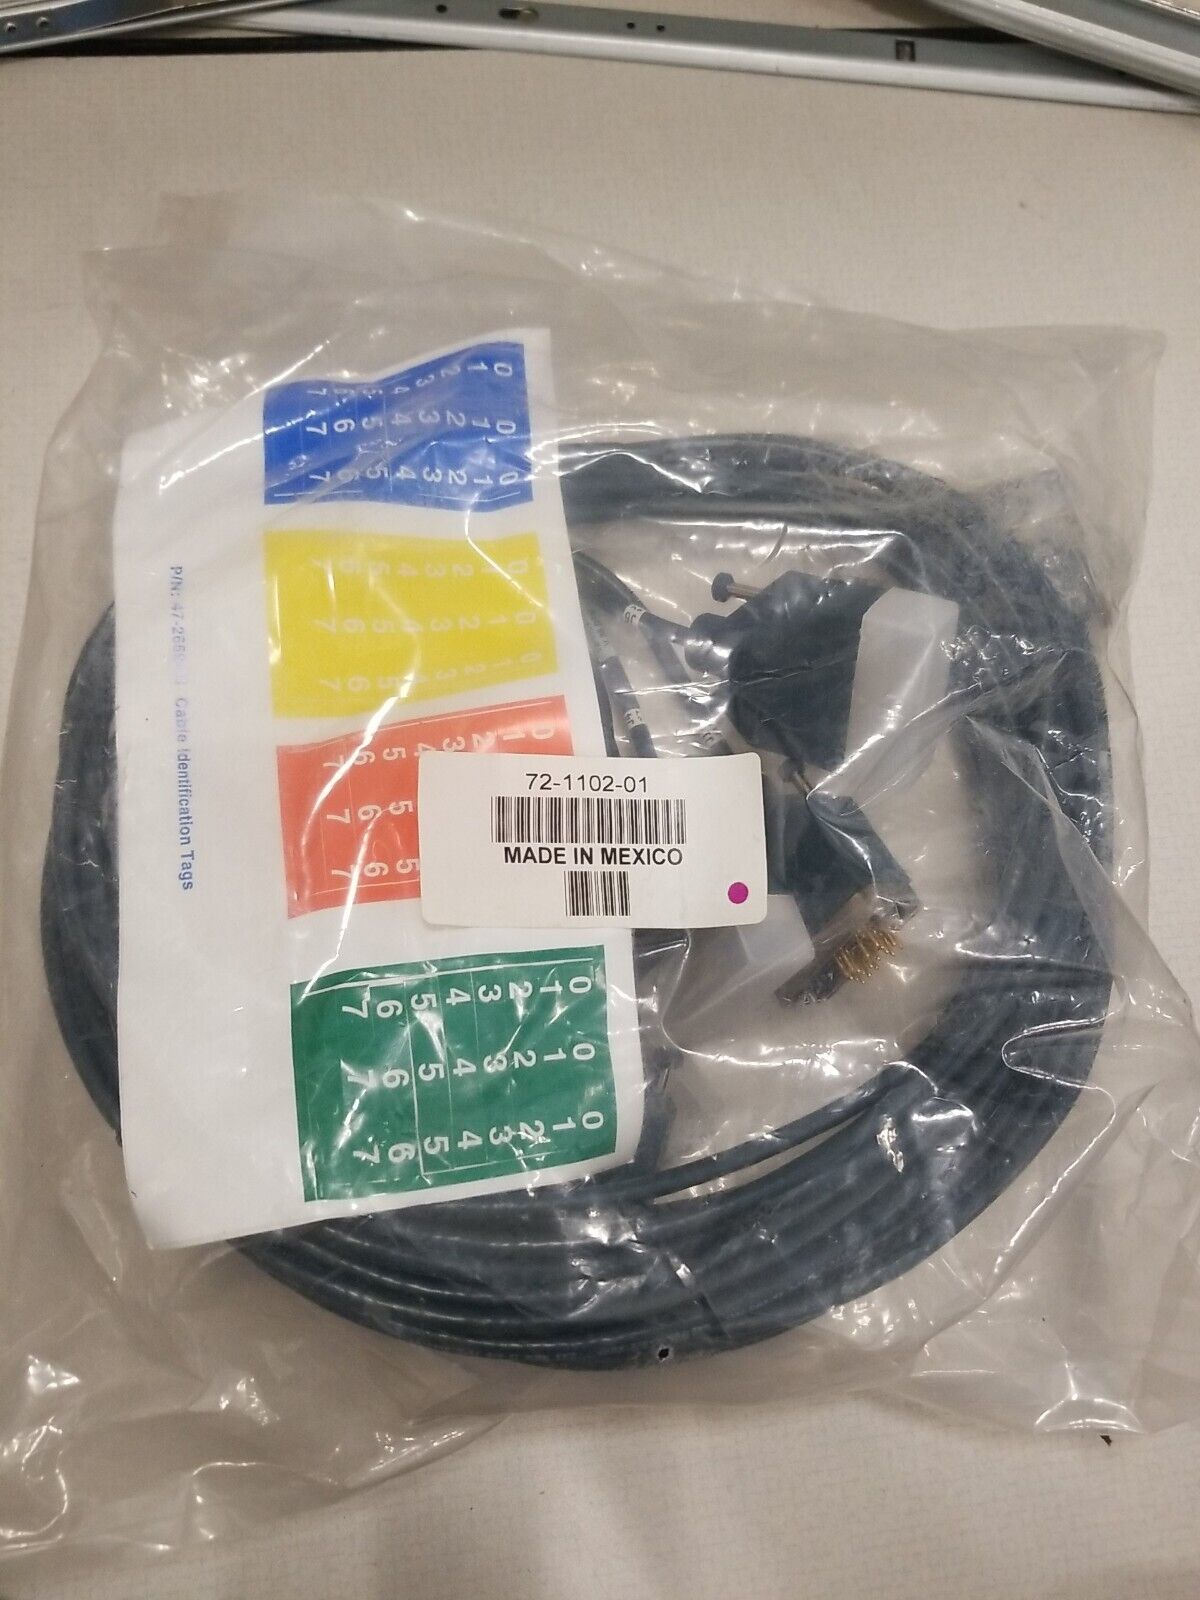 🔥🔥🔥BRAND NEW SEALED 72-1102-01 CISCO SYSTEMS 6 FOOT 8 LEAD CABLE V.35🔥🔥🔥